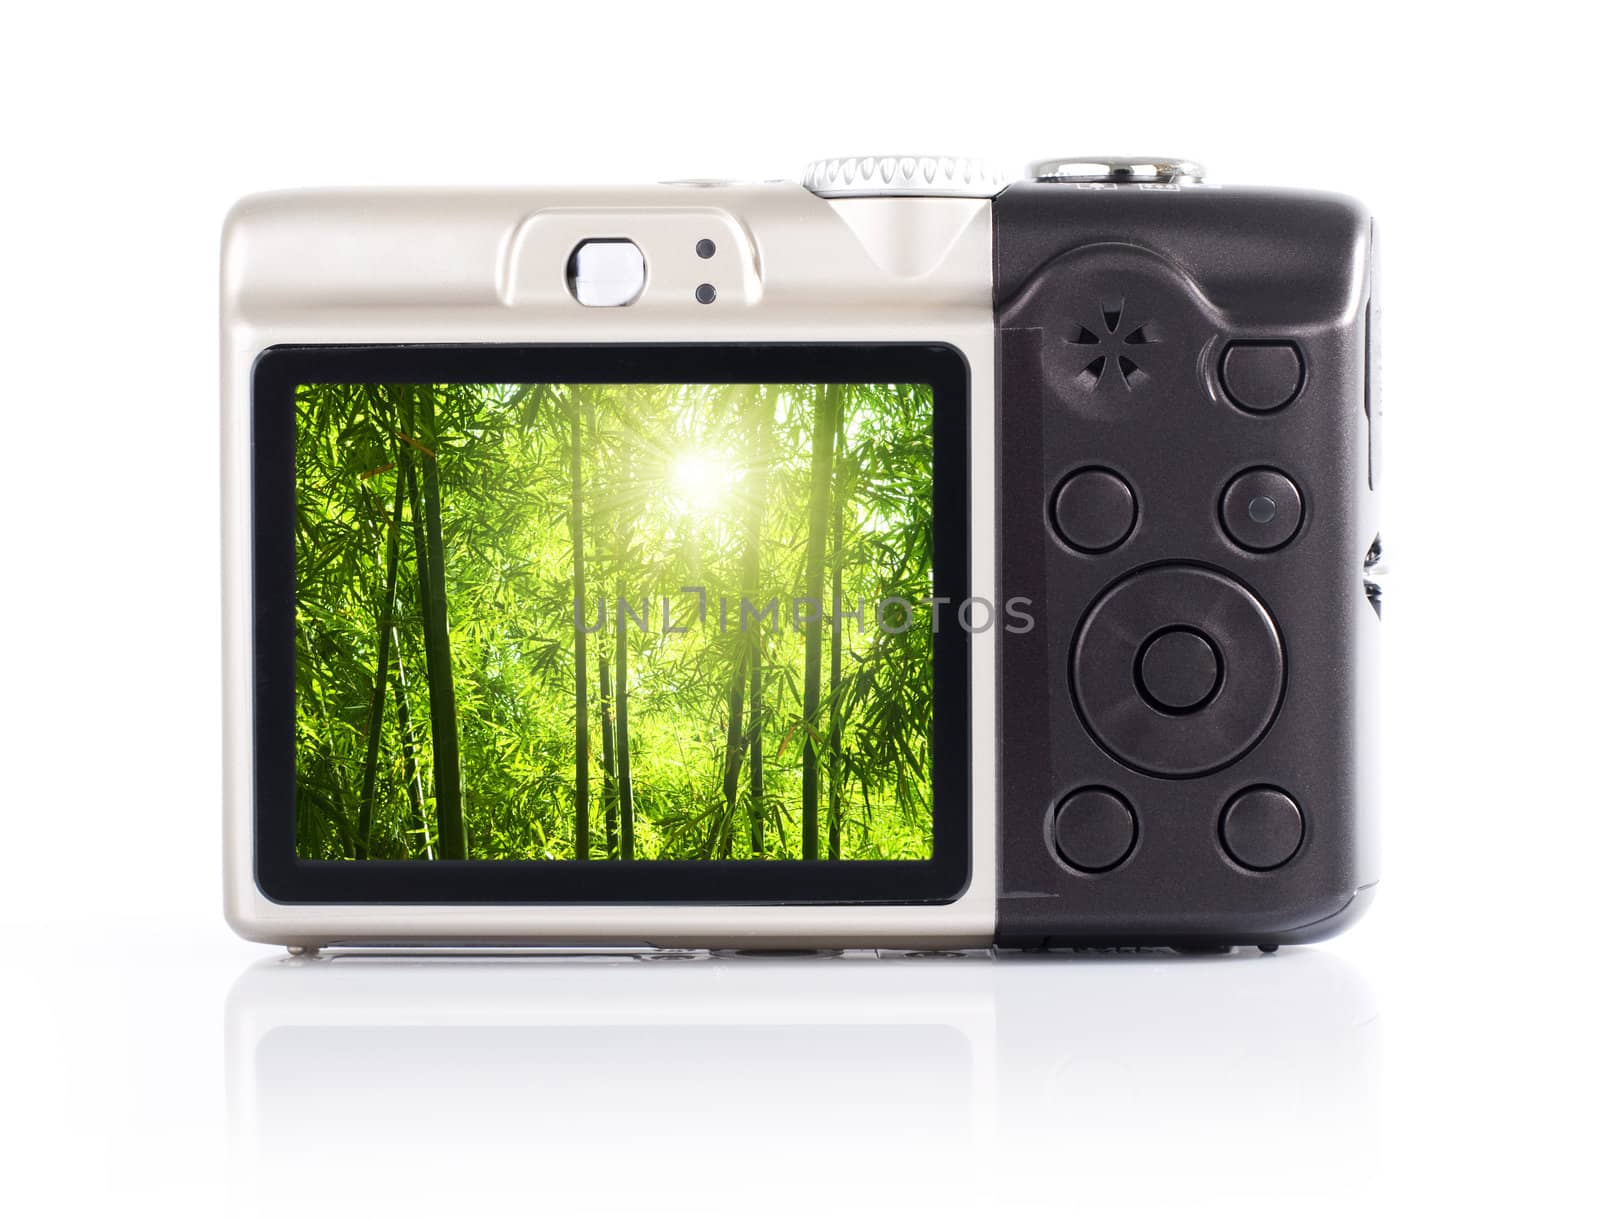 Photo display on camera LCD screen. The nature photo belongs to my own.